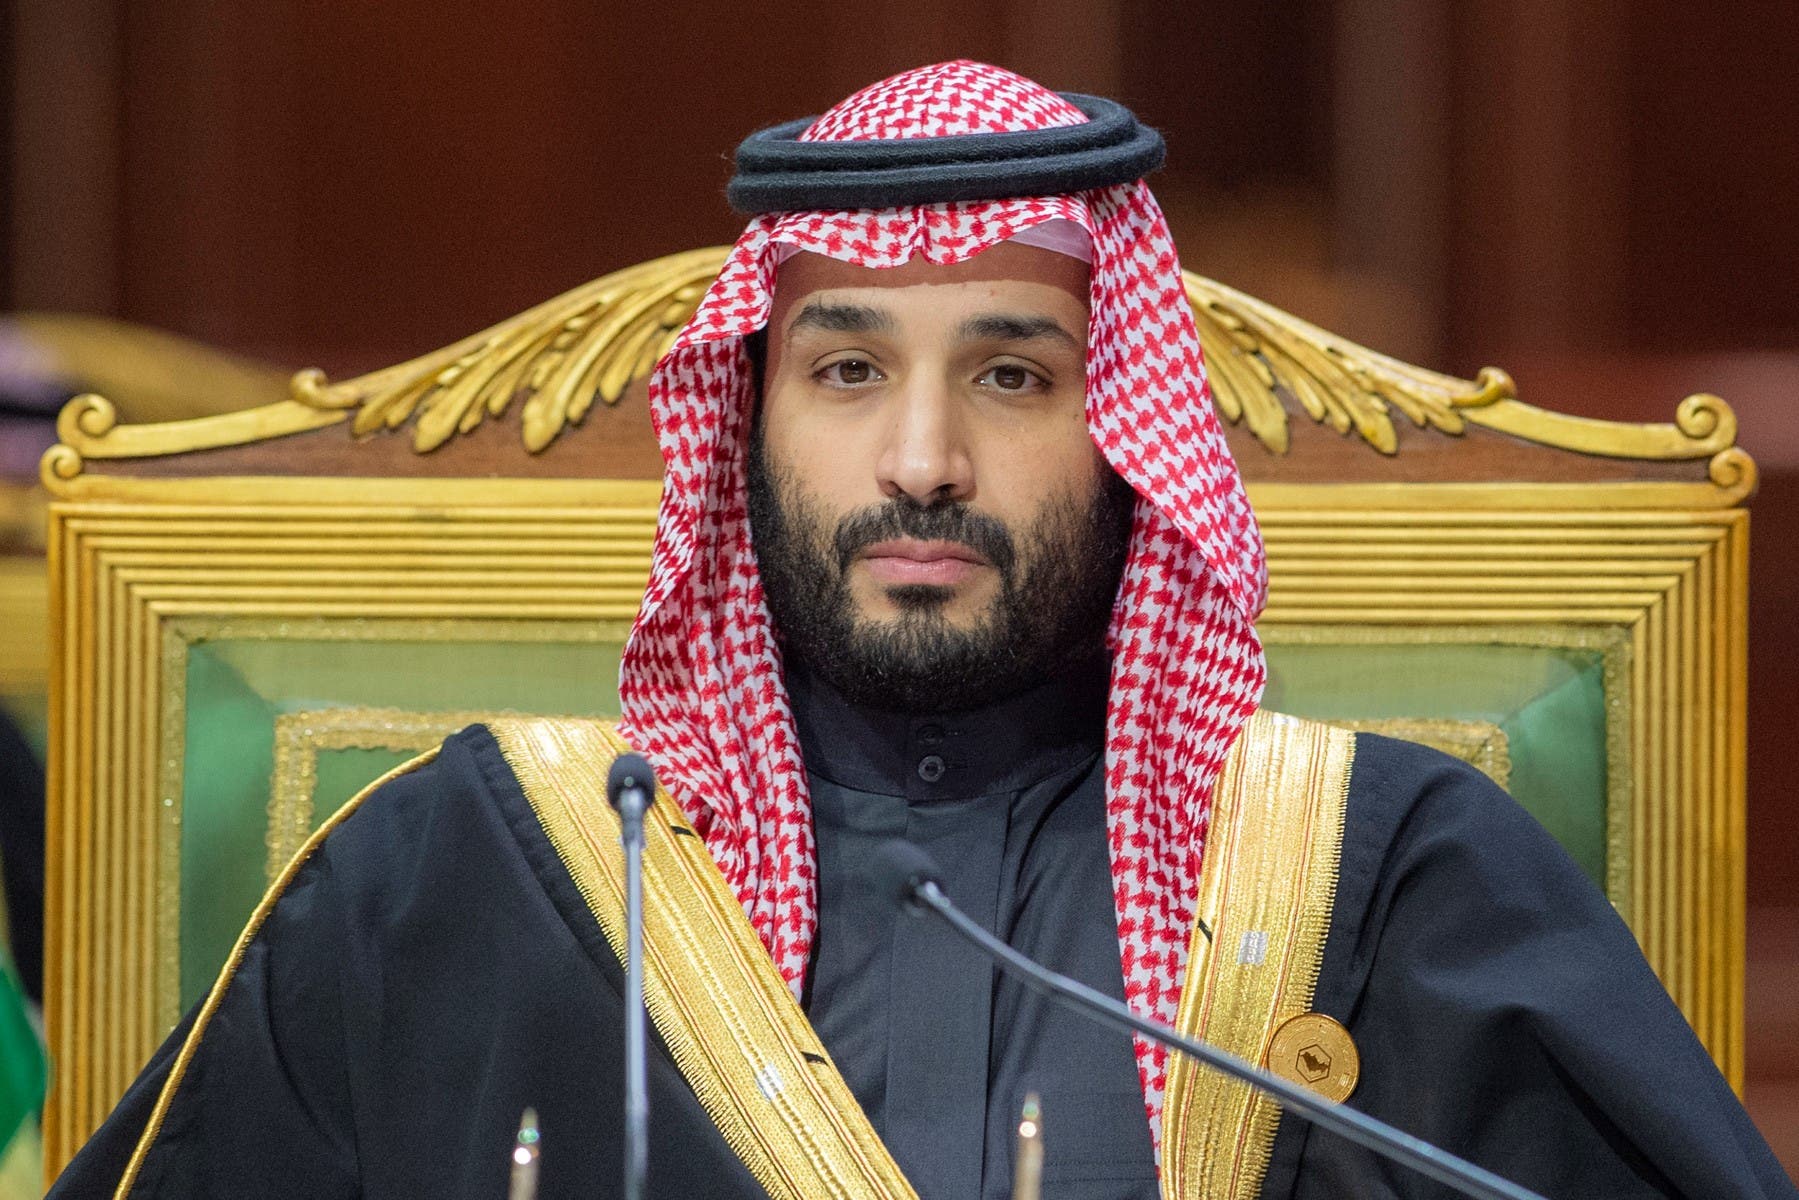 A handout picture provided by the Saudi Royal Palace shows Saudi Crown Prince Mohammed bin Salman chairing the Gulf Cooperation Council (GCC) summit in Saudi Arabia's capital Riyadh on December 14, 2021. (AFP)